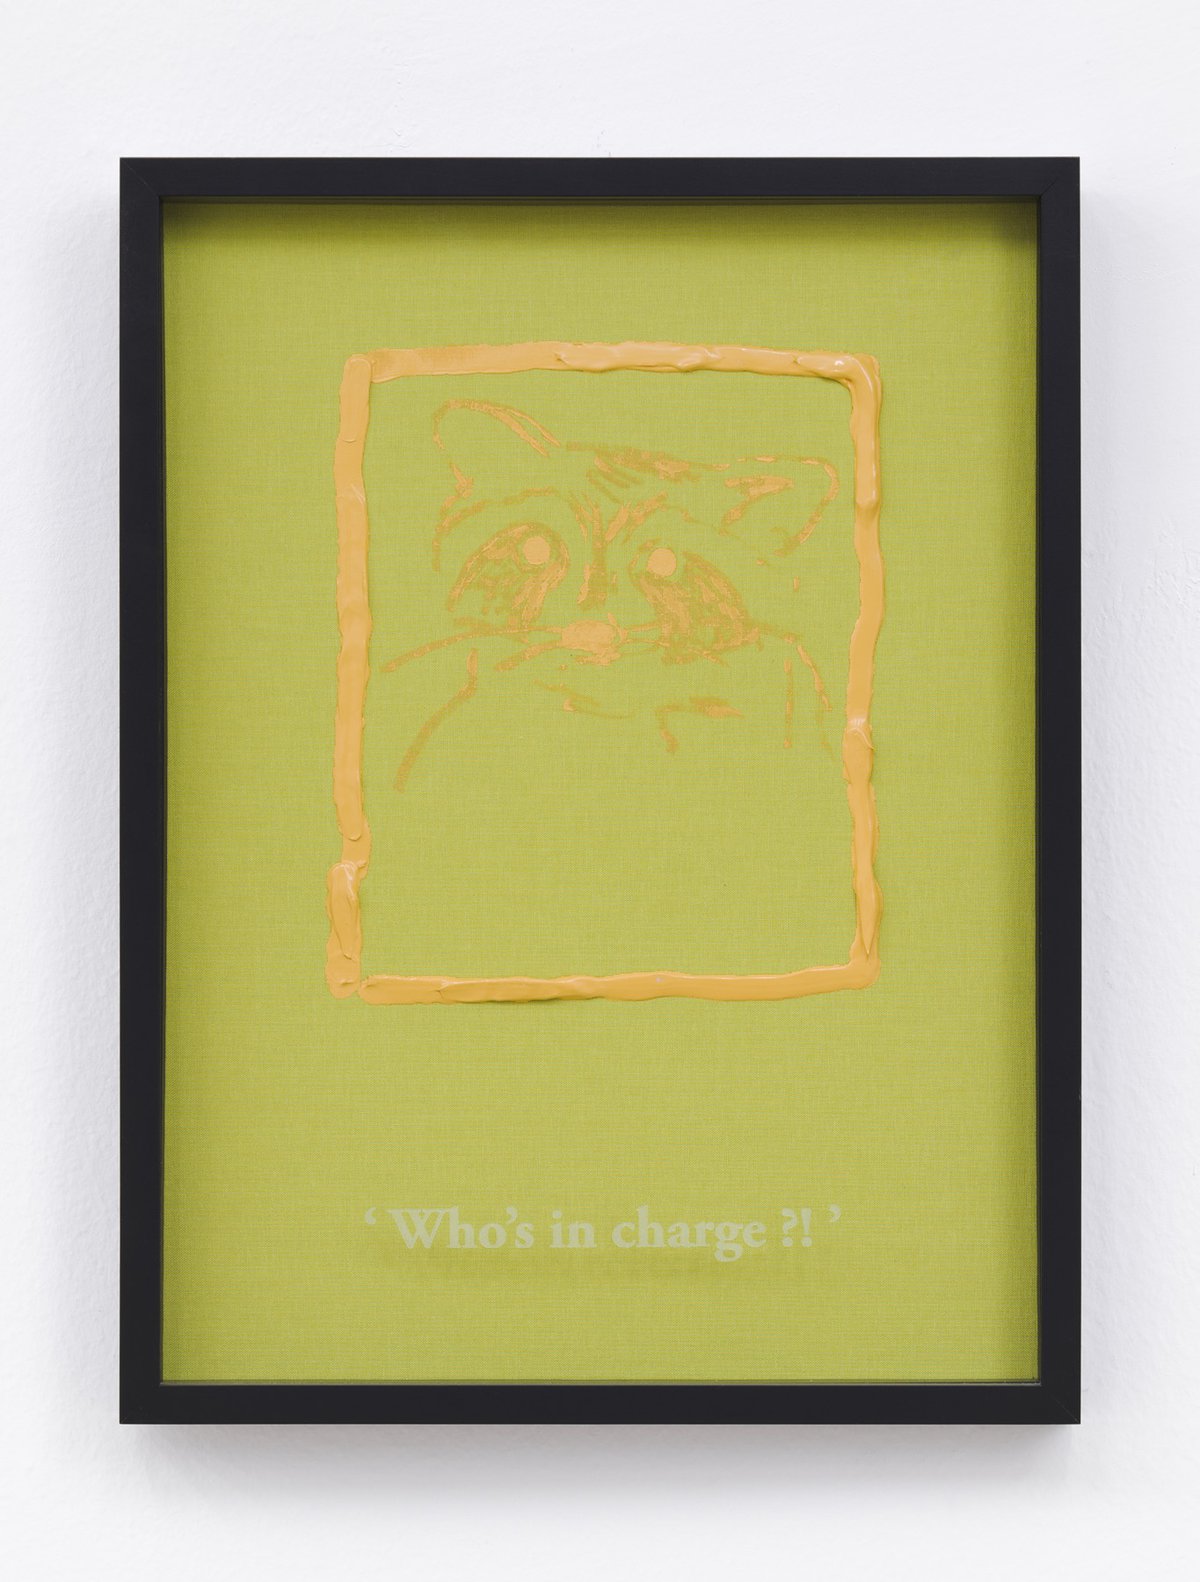 Philipp Timischl&quot;Who&#x27;s in charge?!&quot; (Lime/Naples Yellow Hue), 2017Acrylic on linen and glass-engraved object frame40.1 x 32.1 cm